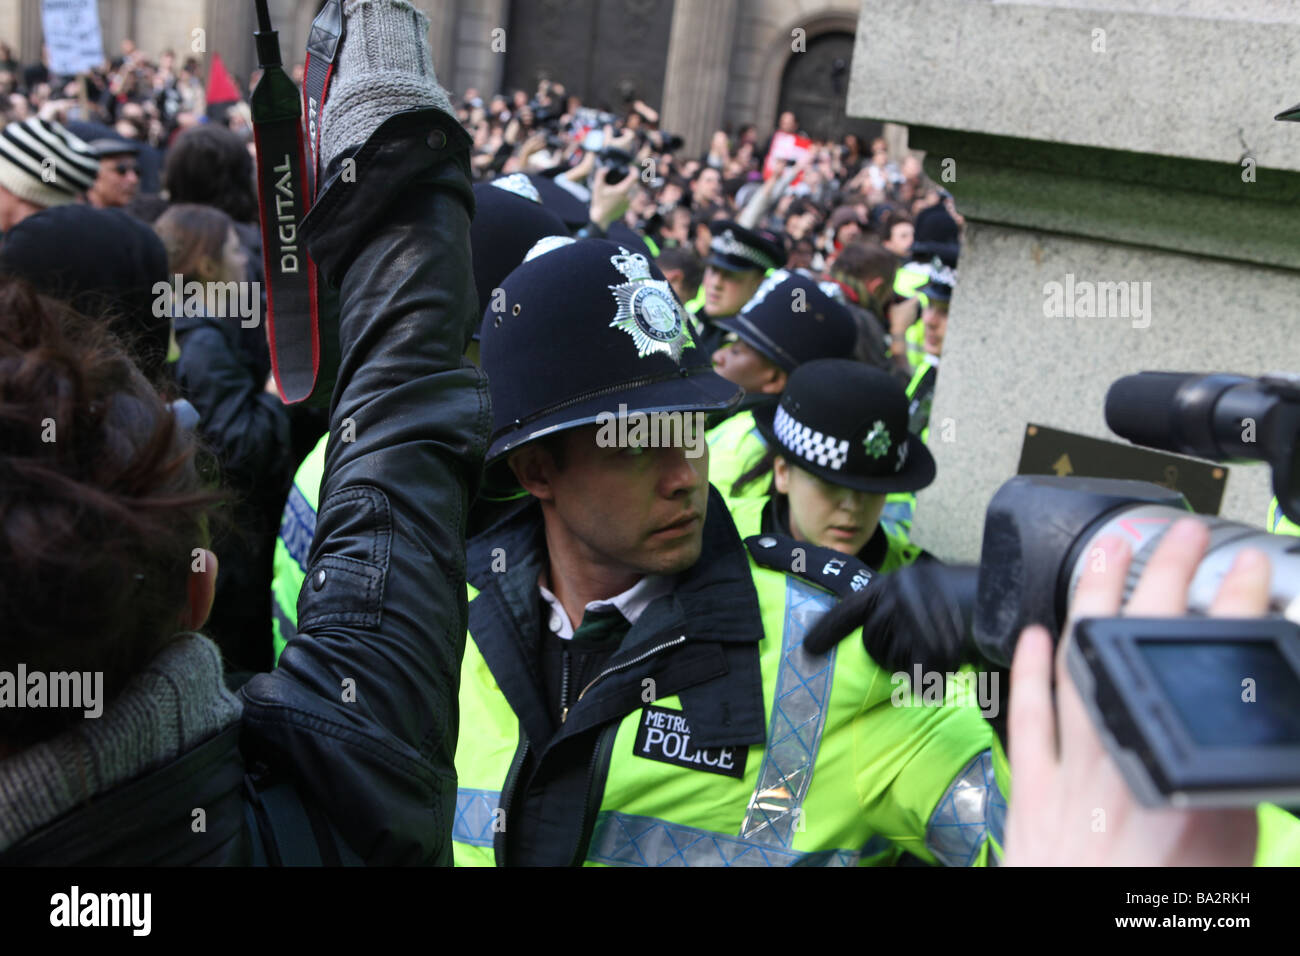 police lined up stopping protesters during the g20 protests in london. they are preventing protesters leaving the protest Stock Photo